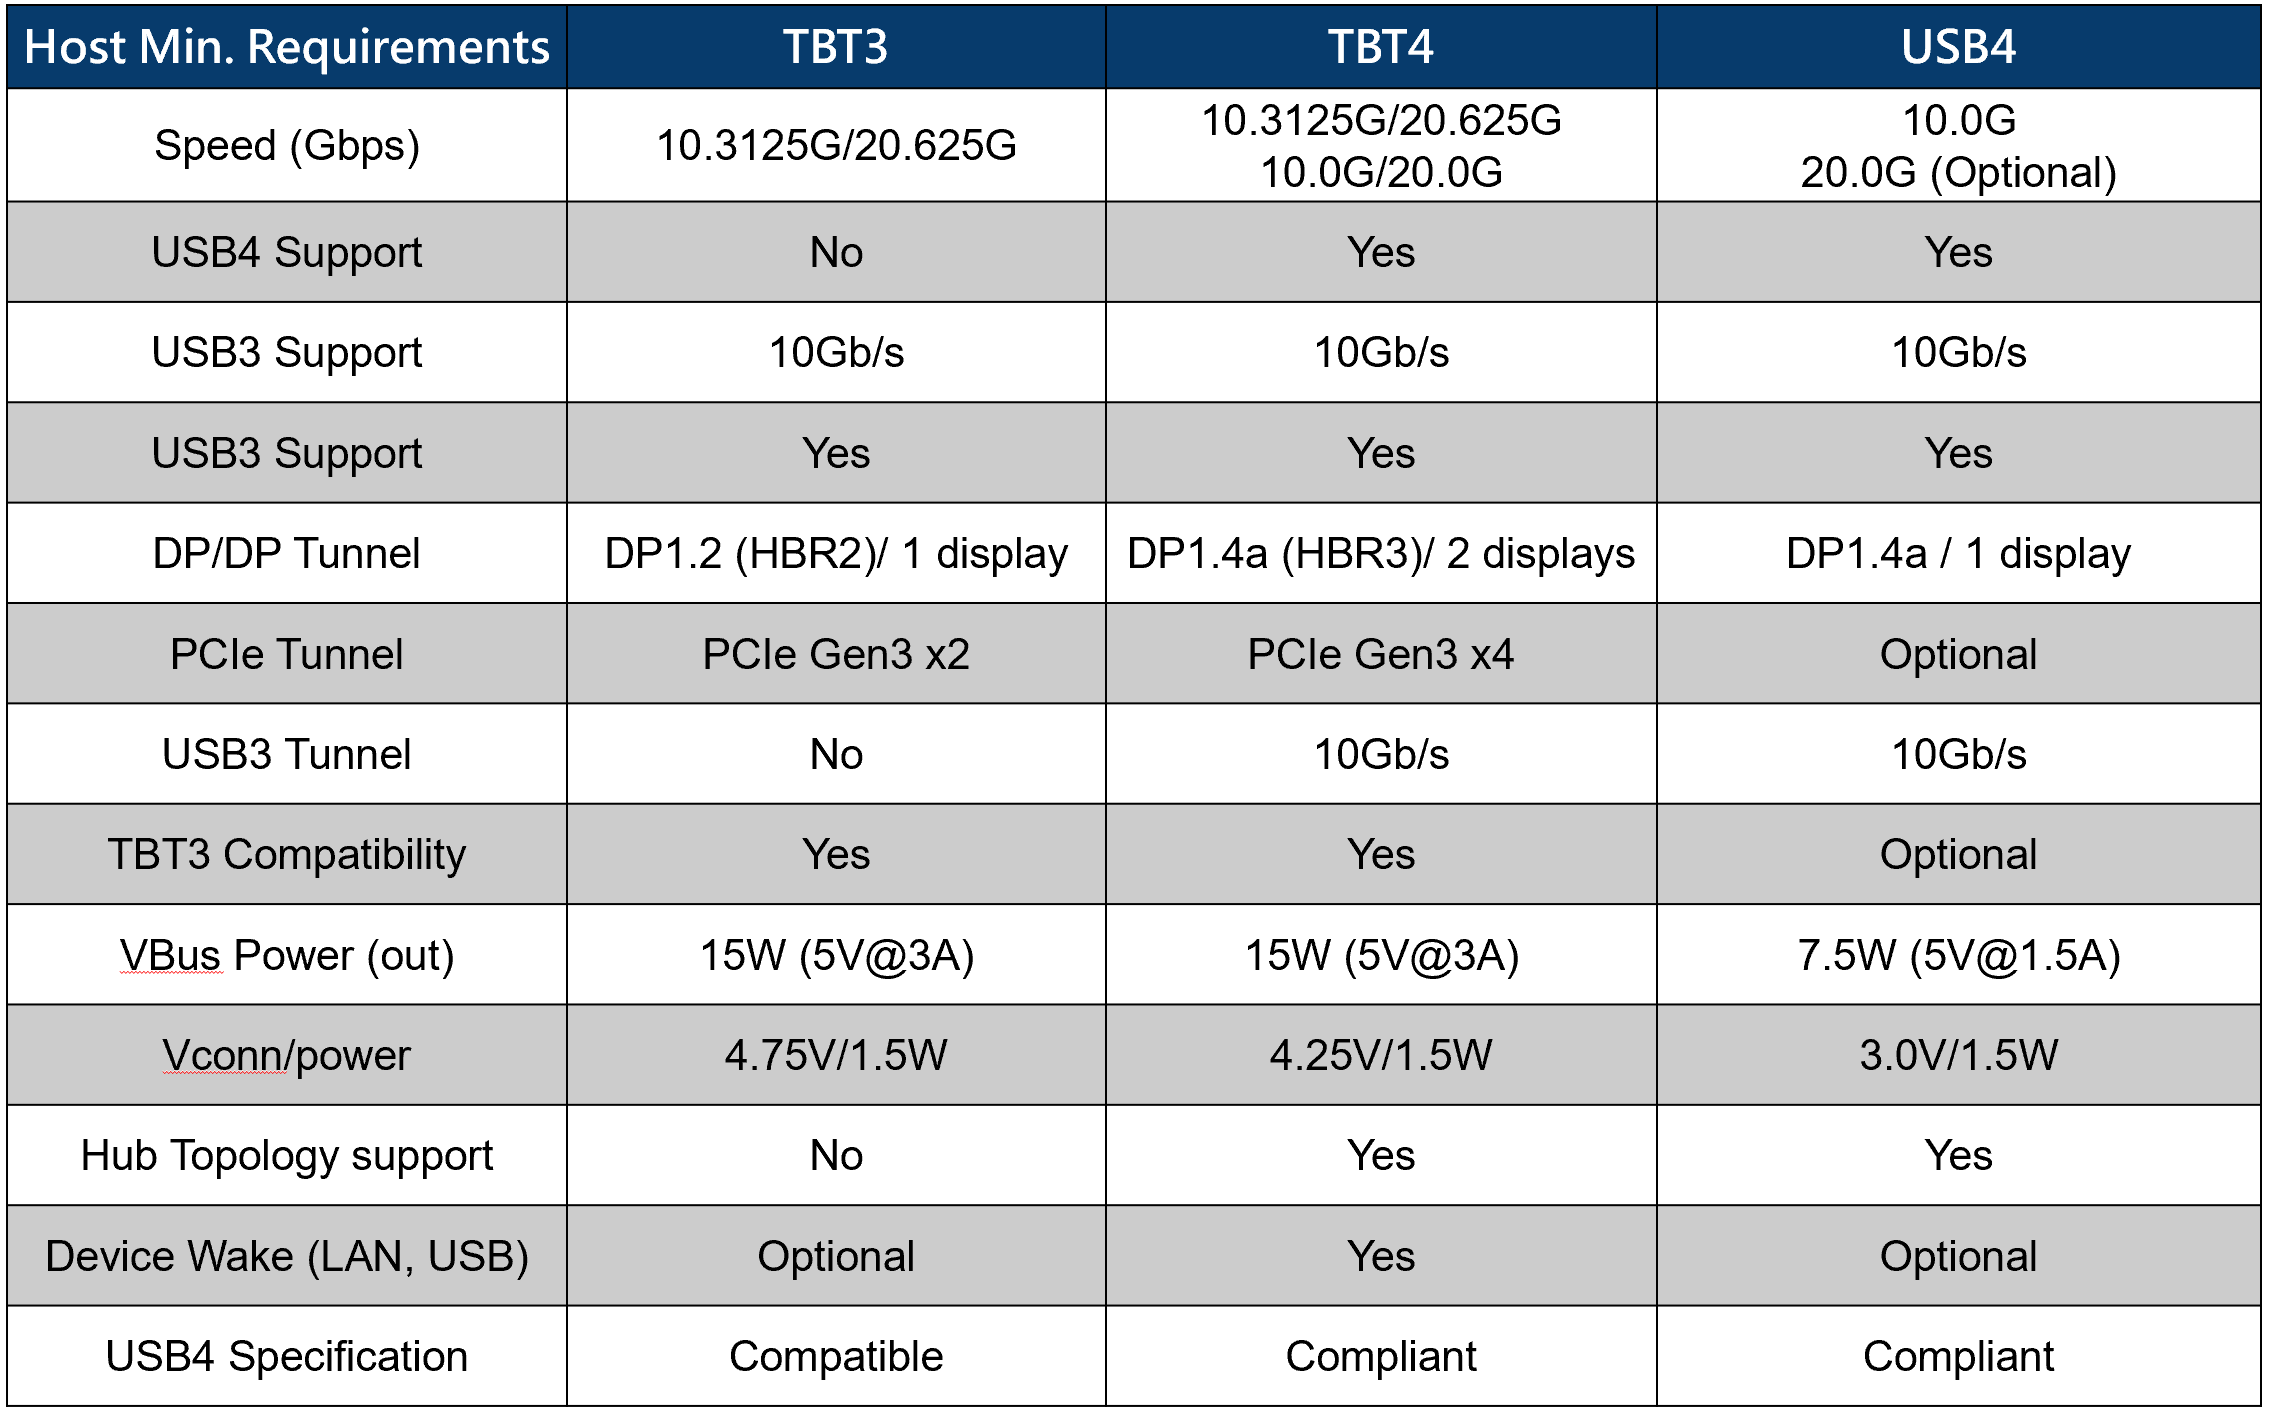 Thunderbolt Standards Services_Comparison table between TBT3, TBT4, and USB4